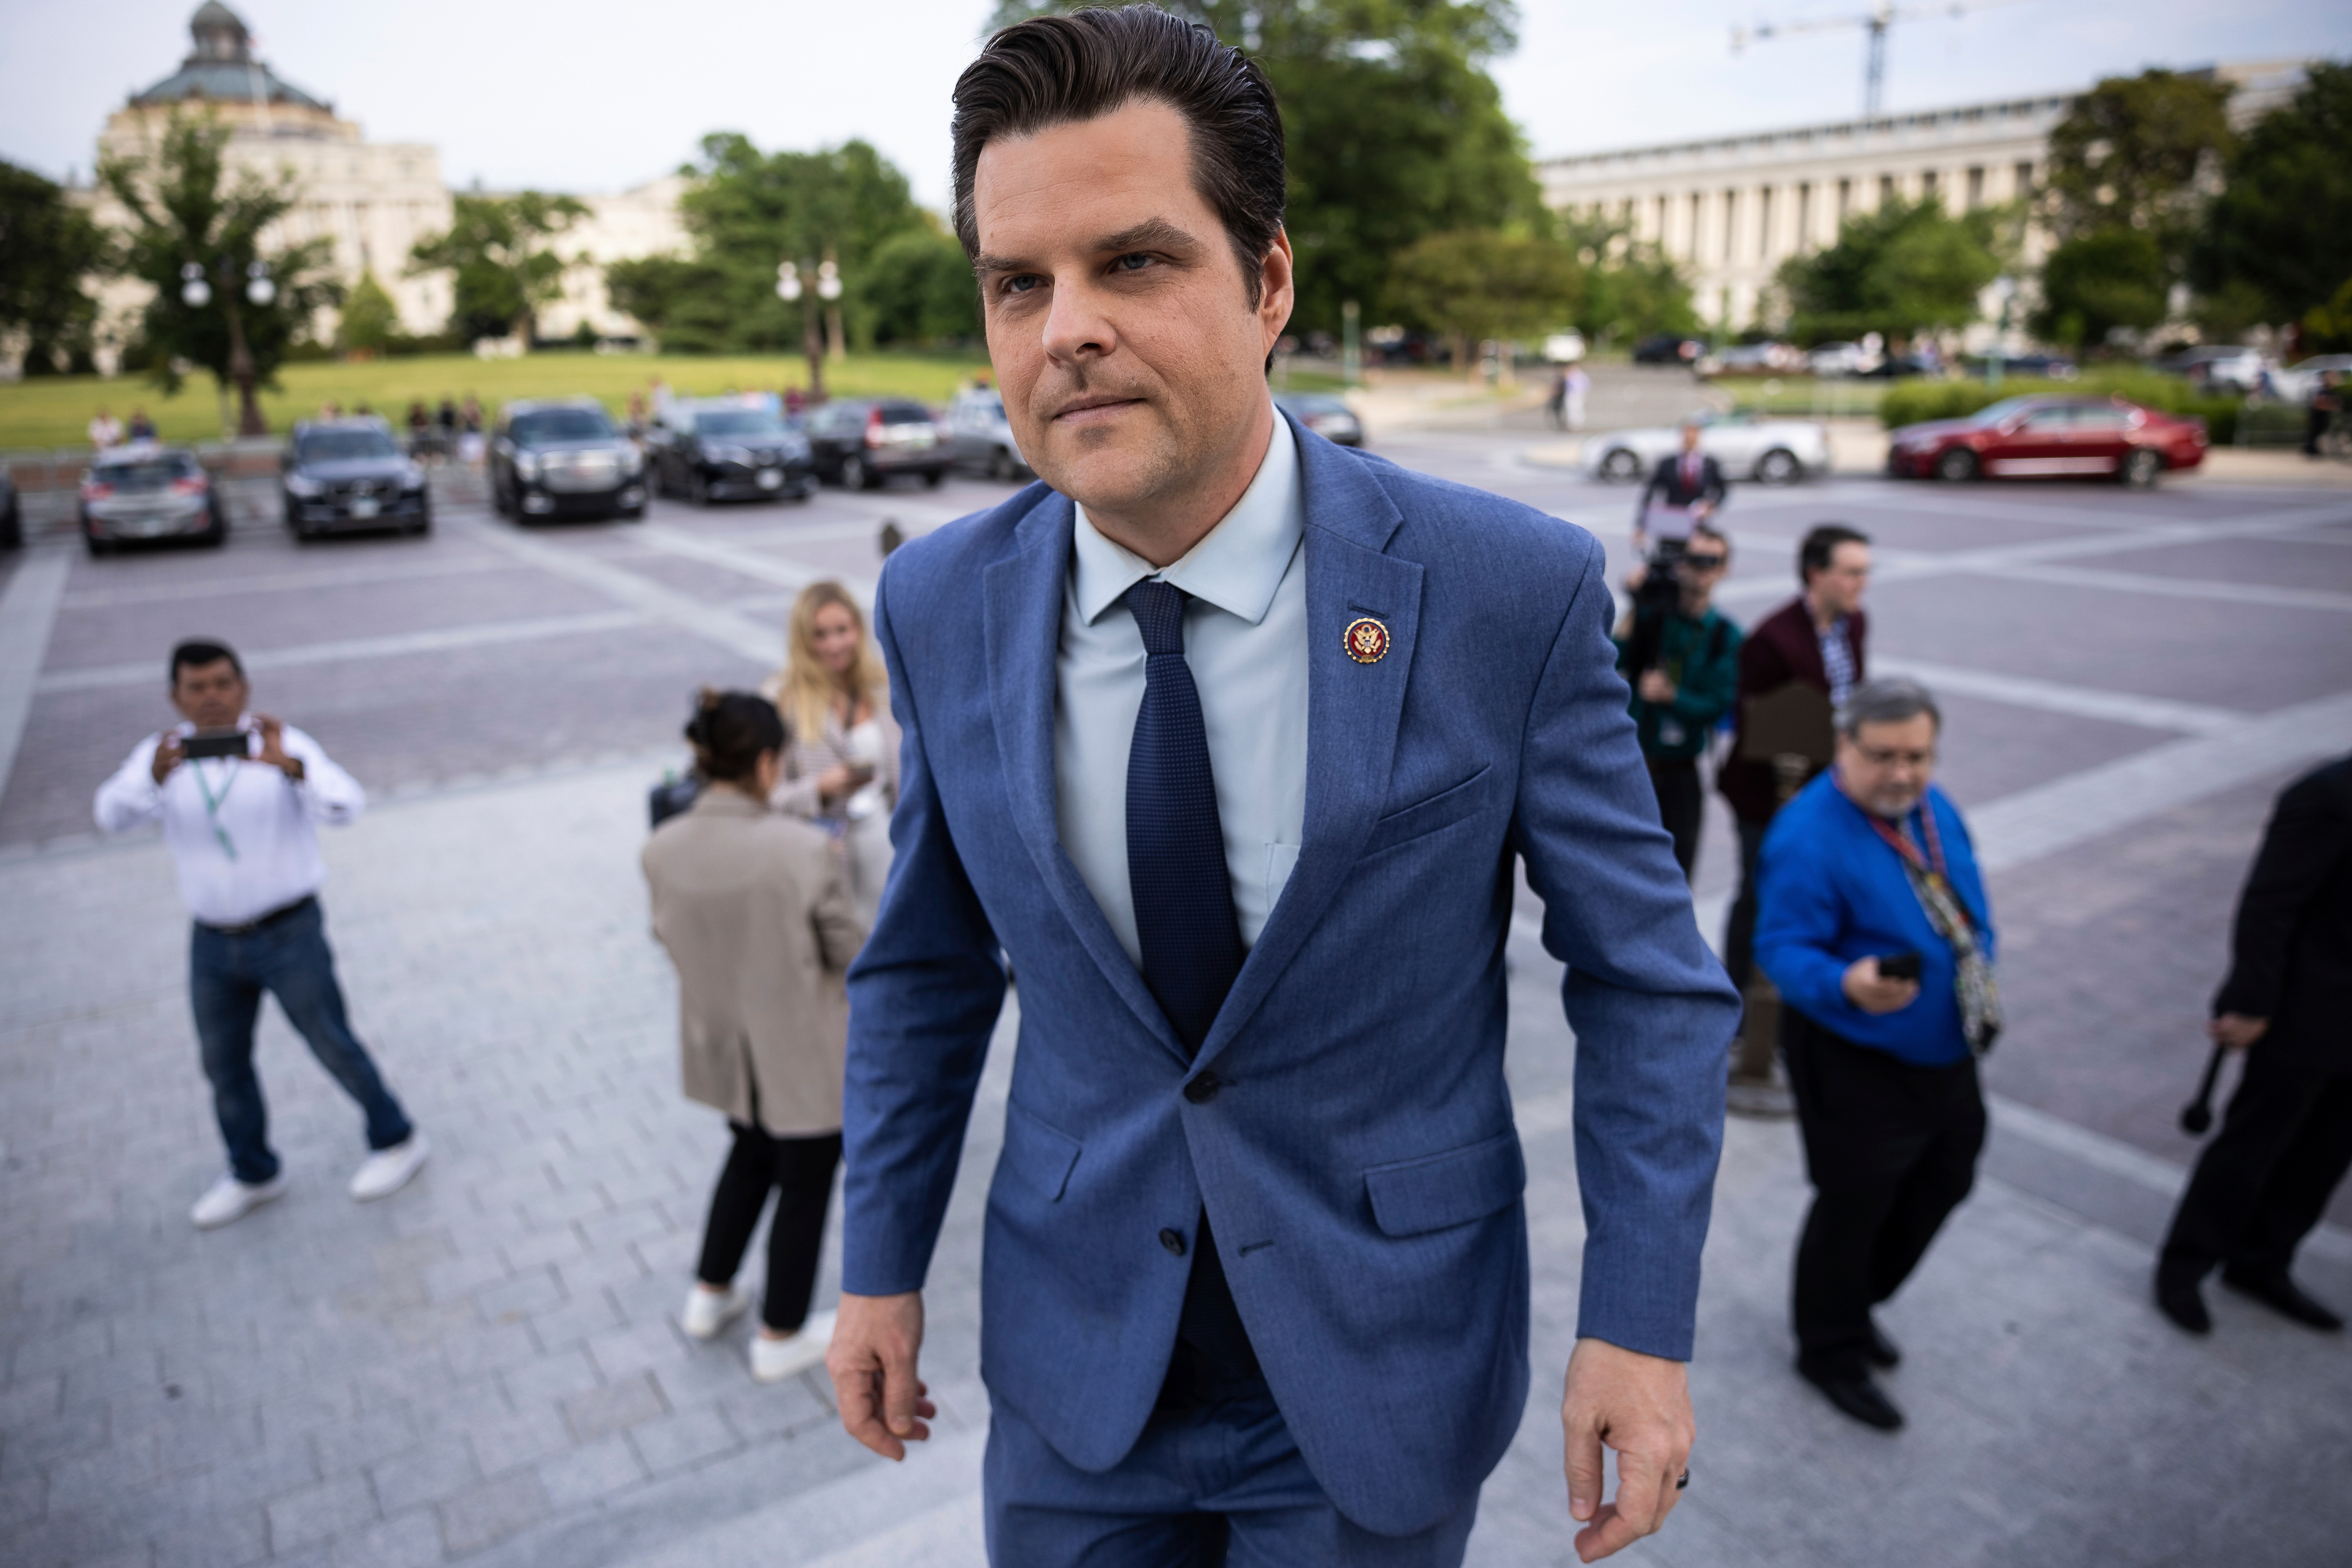 Rep. Matt Gaetz arrives for a vote at the US Capitol in Washington, DC, on Tuesday.